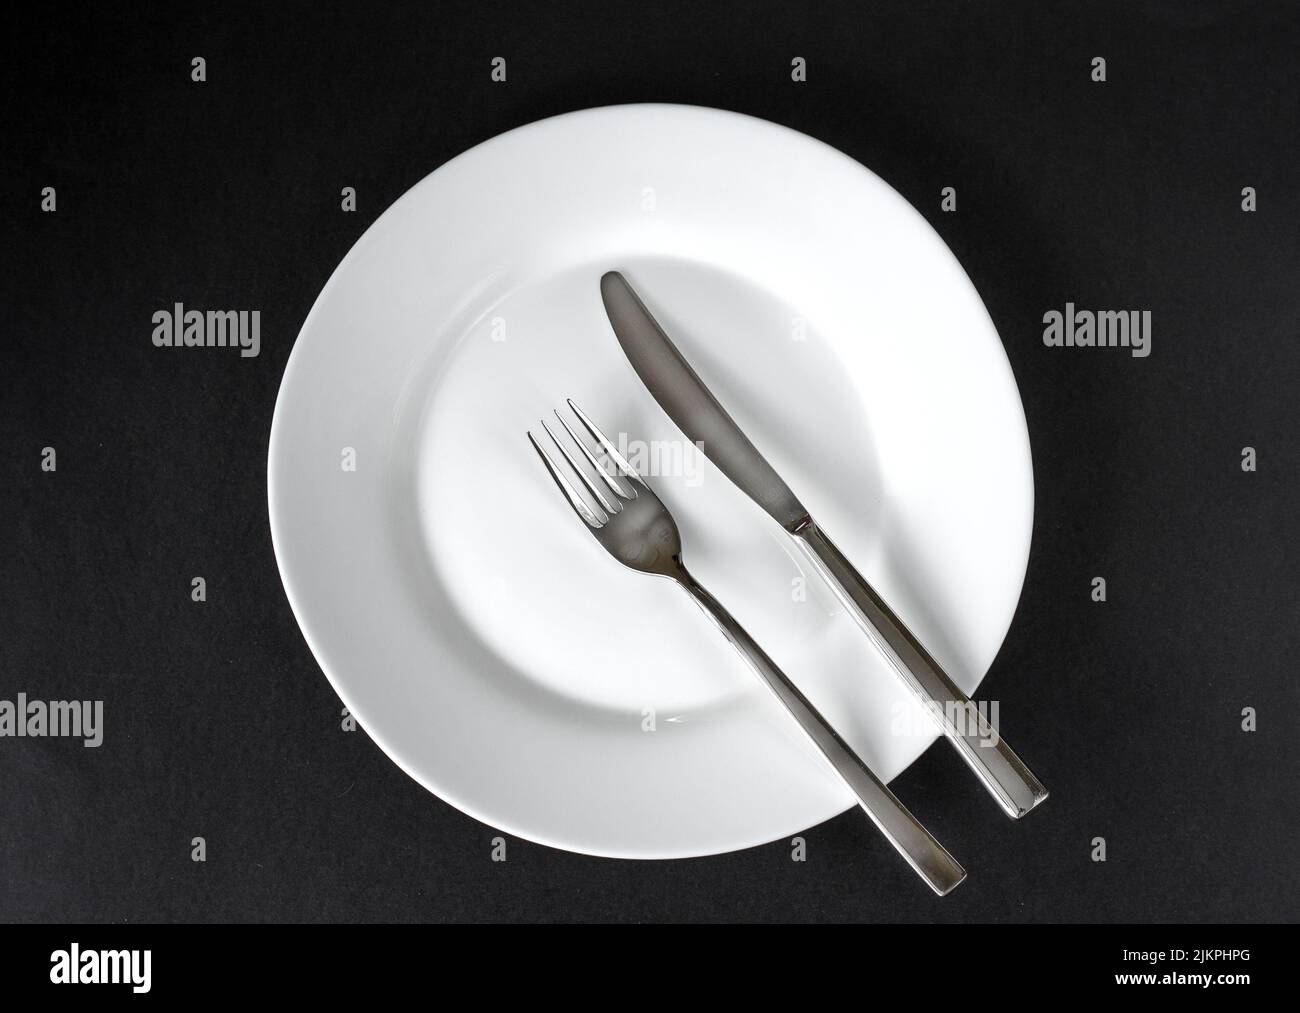 Served plate with cutlery. Empty white plate and stainless knife and fork isolated on black background. Top view. Studio shot Stock Photo